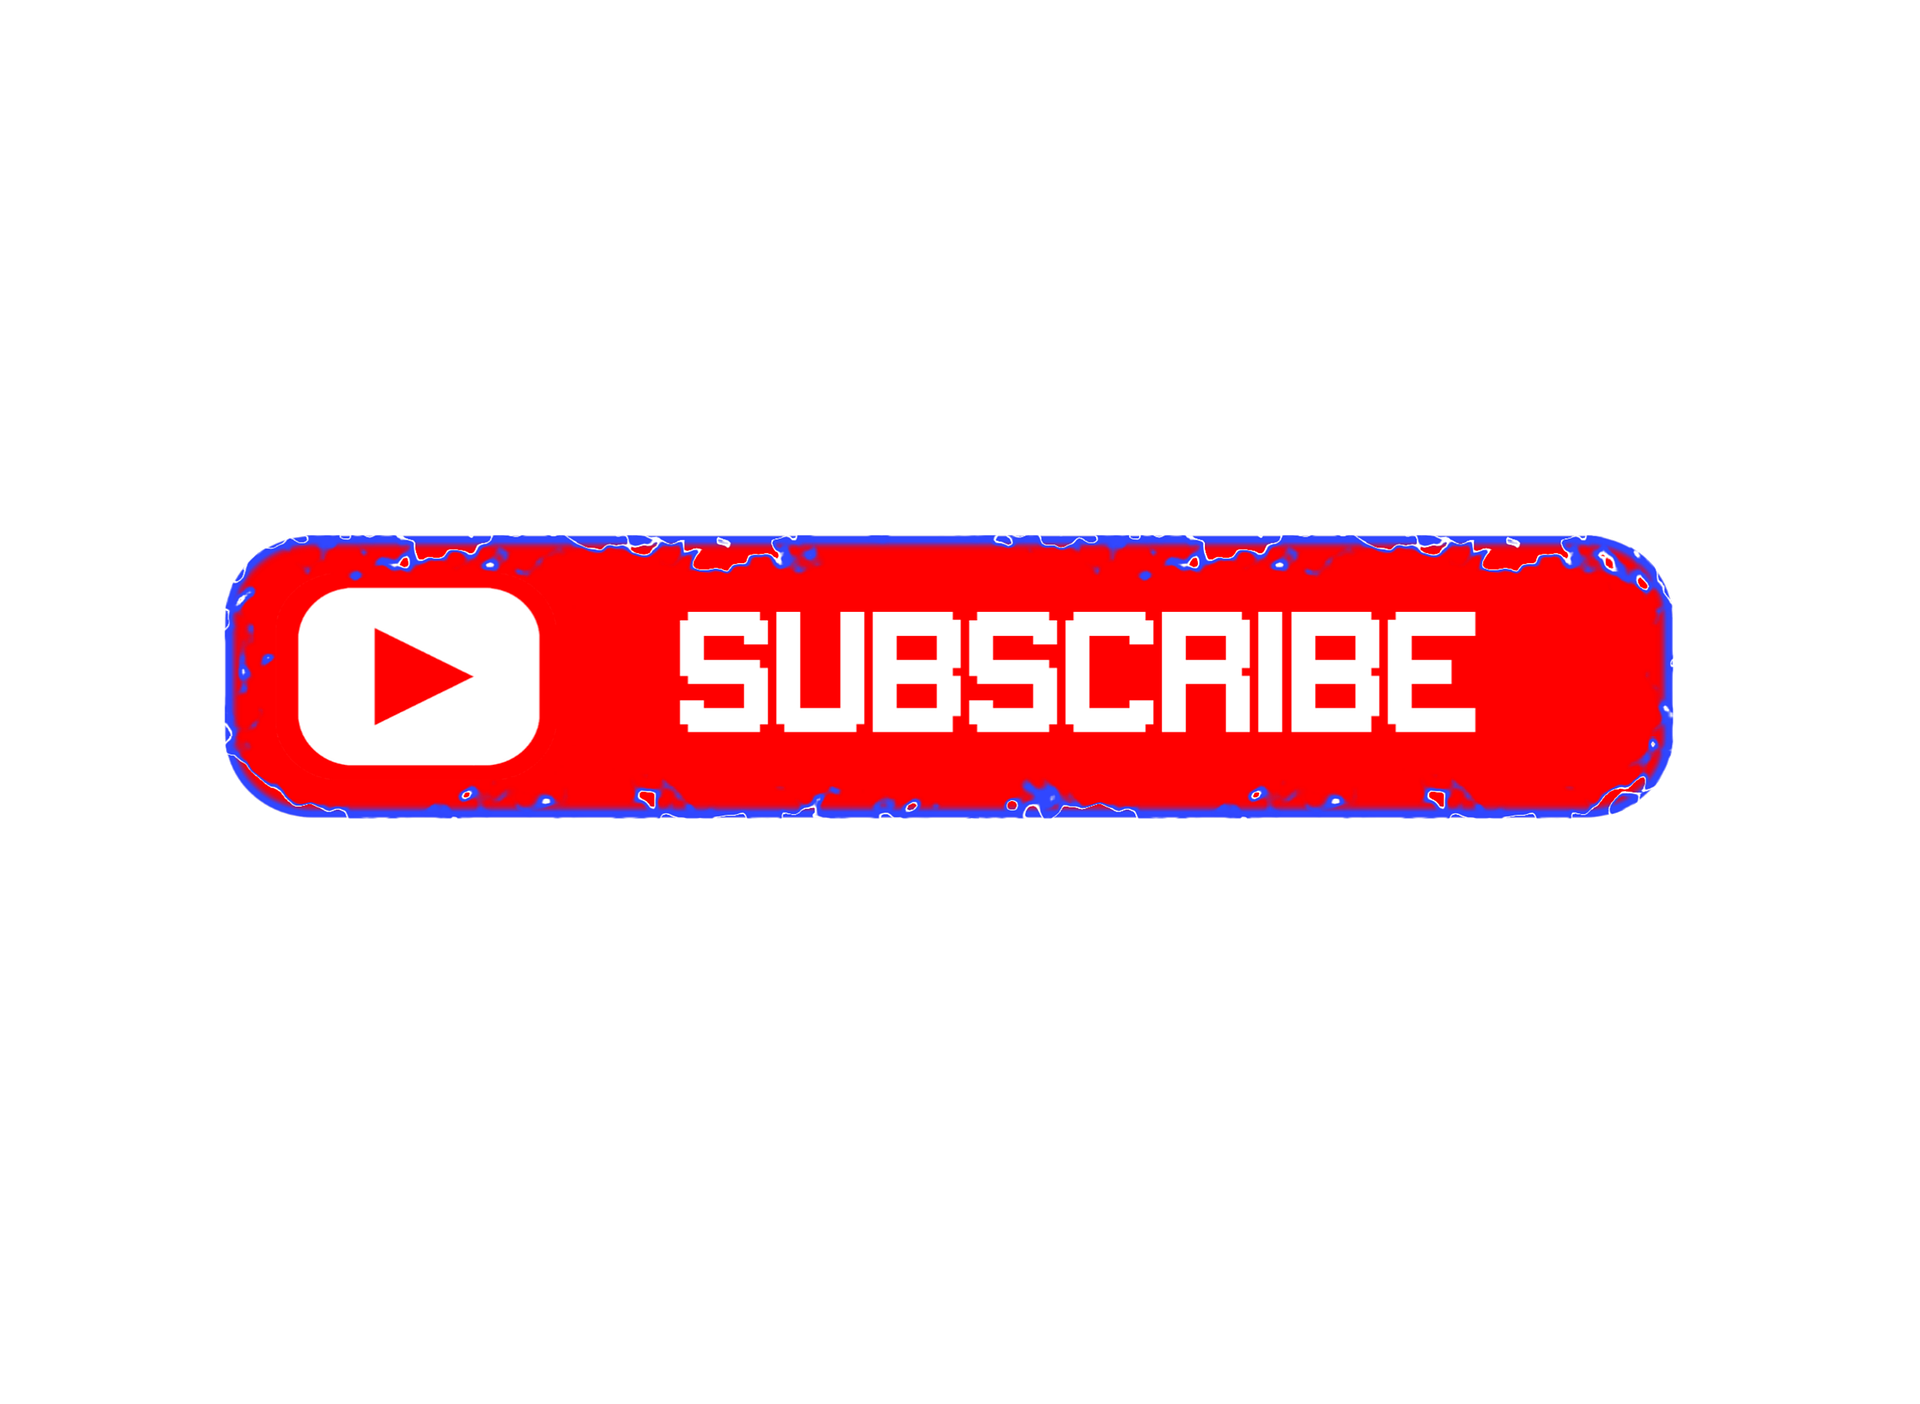  Youtube  play logo  subscribe button 48683 Free Icons and 